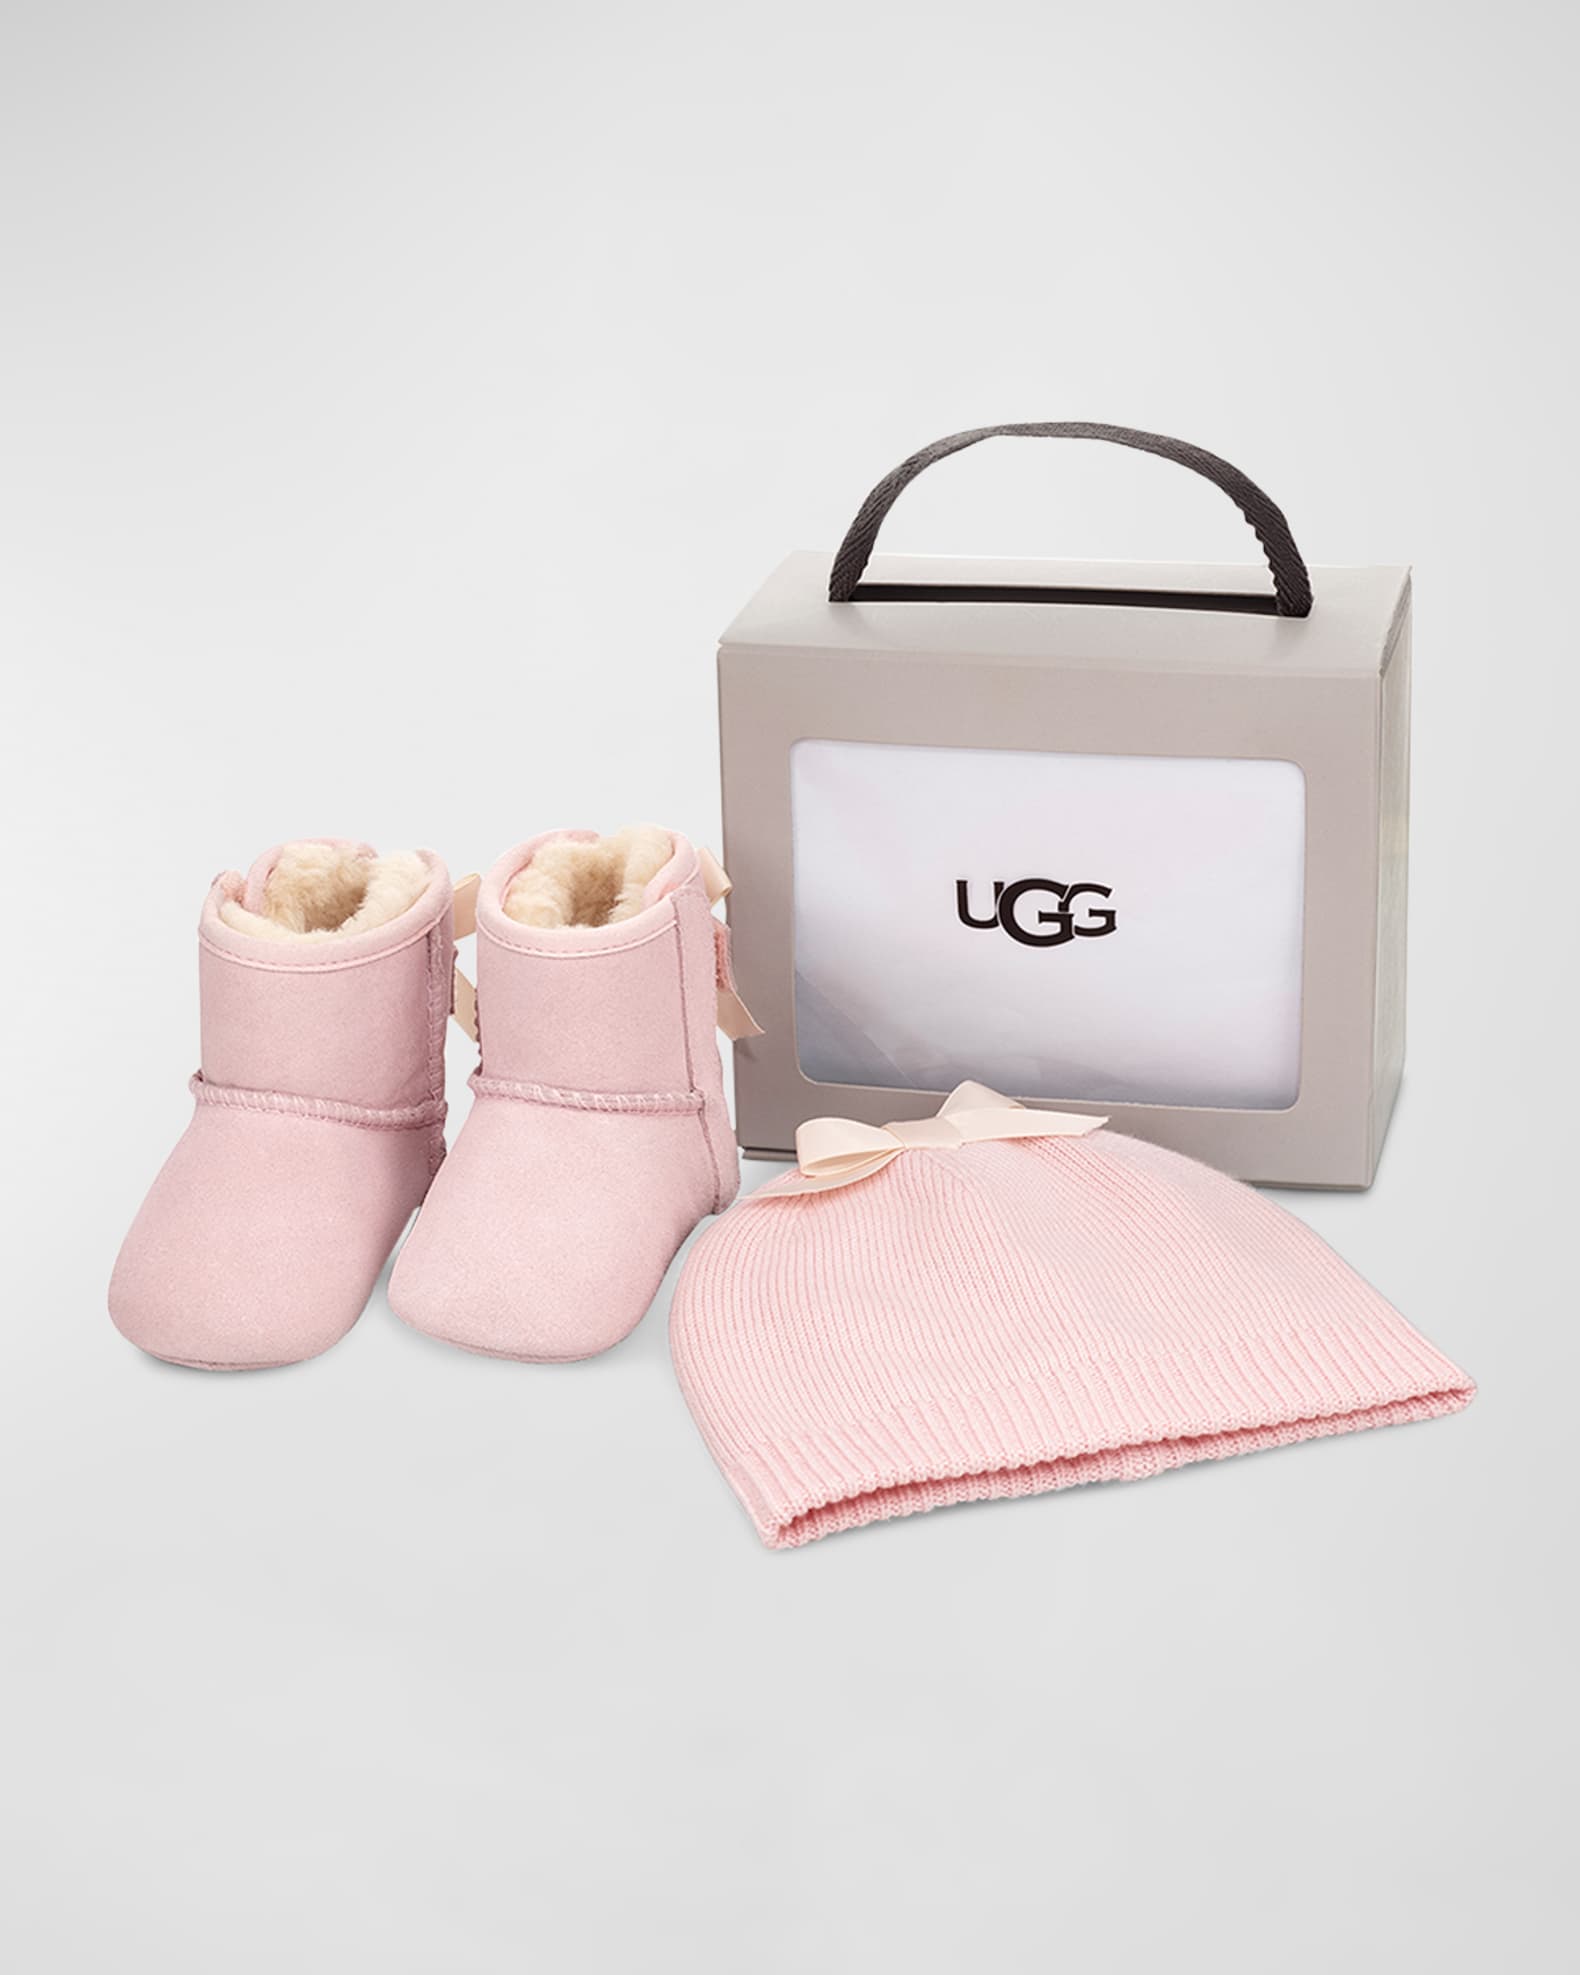 ugg, fashion, and shoes image  Fur boots, Louis vuitton handbags outlet,  Boots